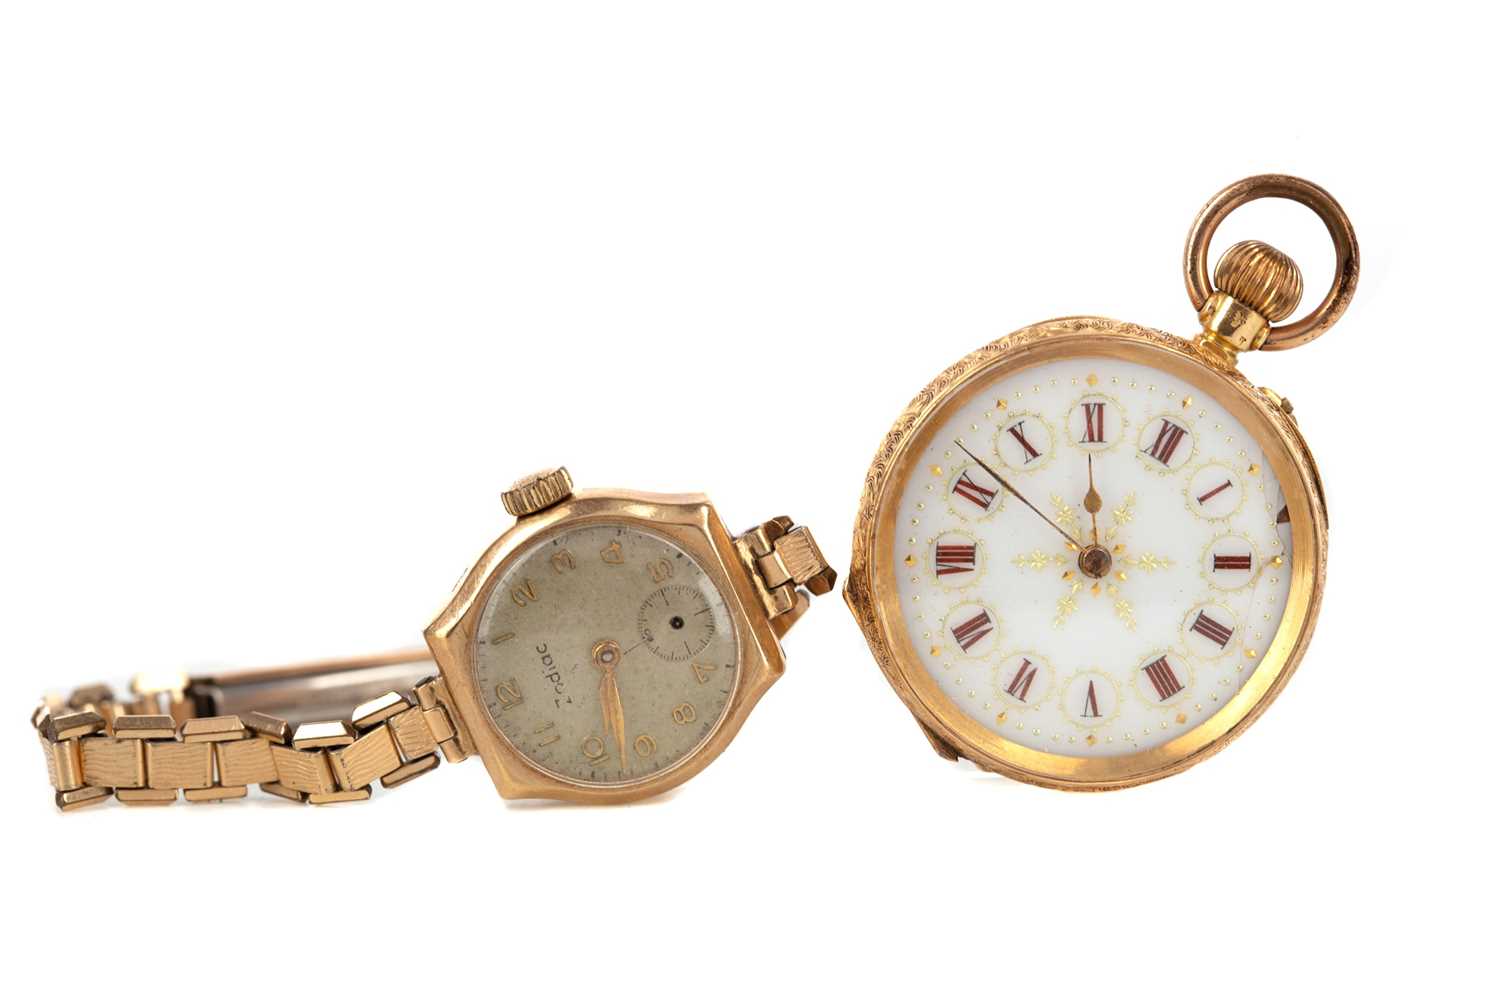 Lot 725 - A LADY'S EIGHTEEN CARAT GOLD CASED FOB WATCH AND A GOLD CASED ZODIAC WRIST WATCH